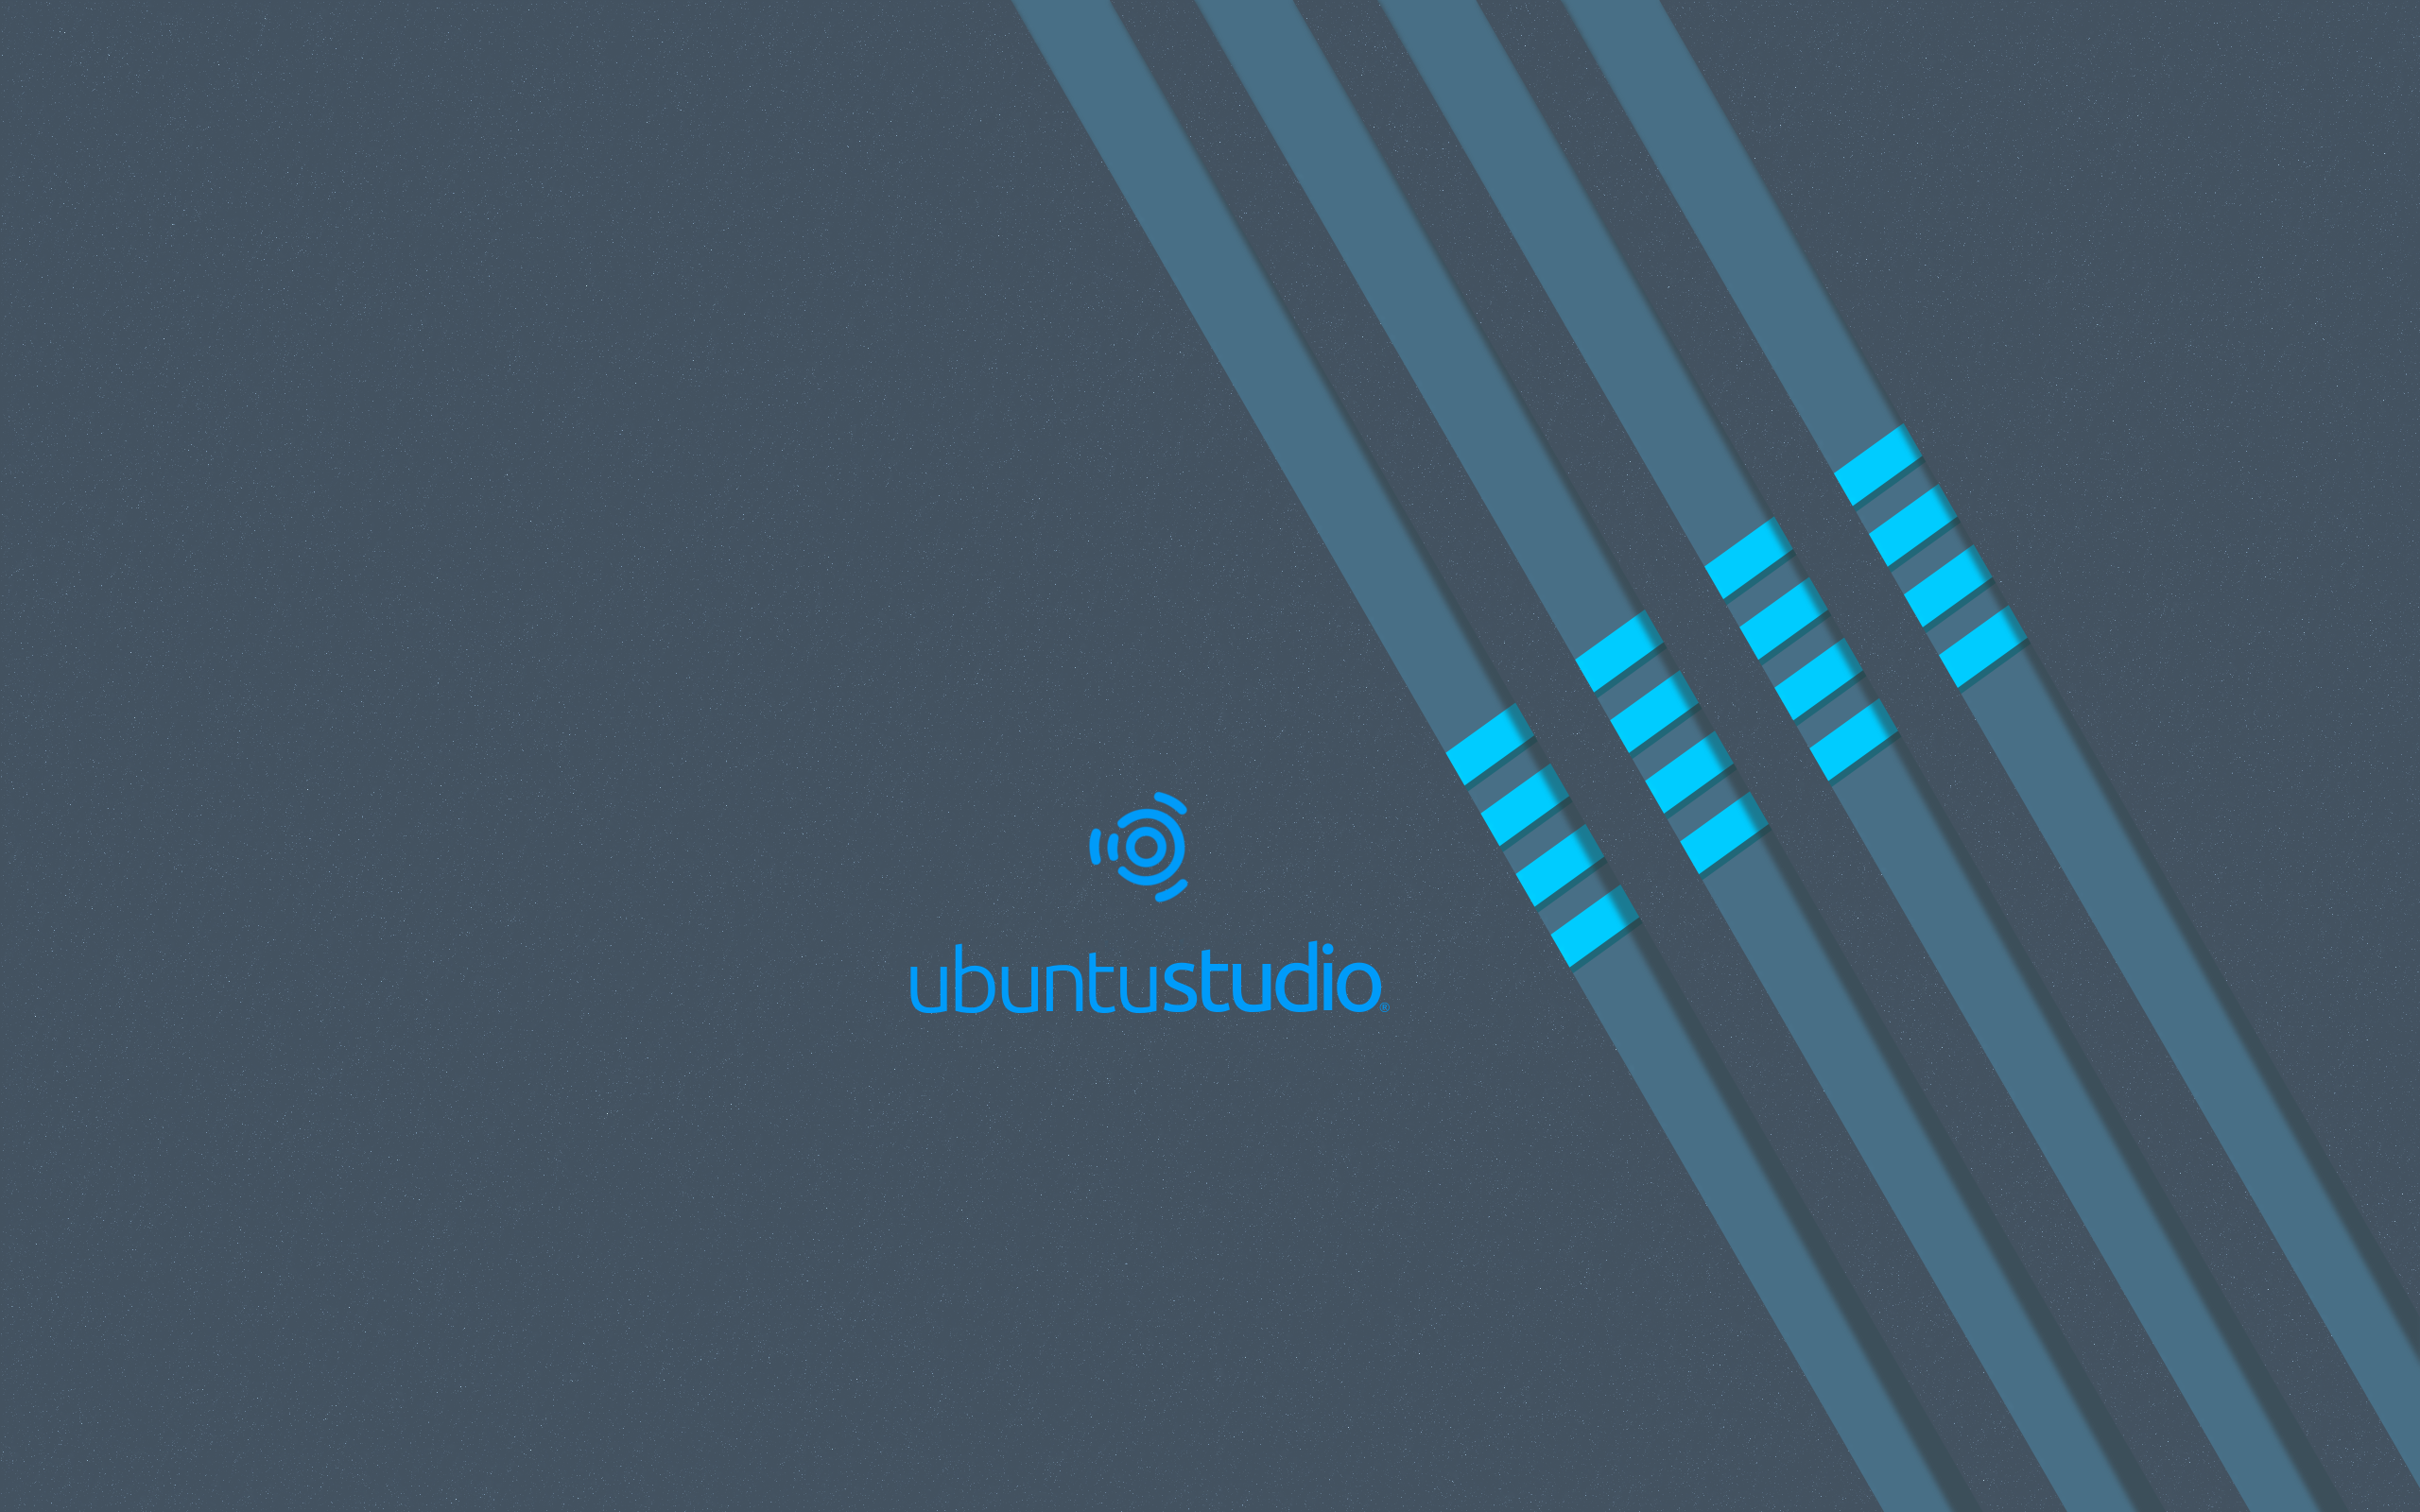 Download Ubuntu Studio 18 04 Wallpapers For Linux Entire Hd Collection